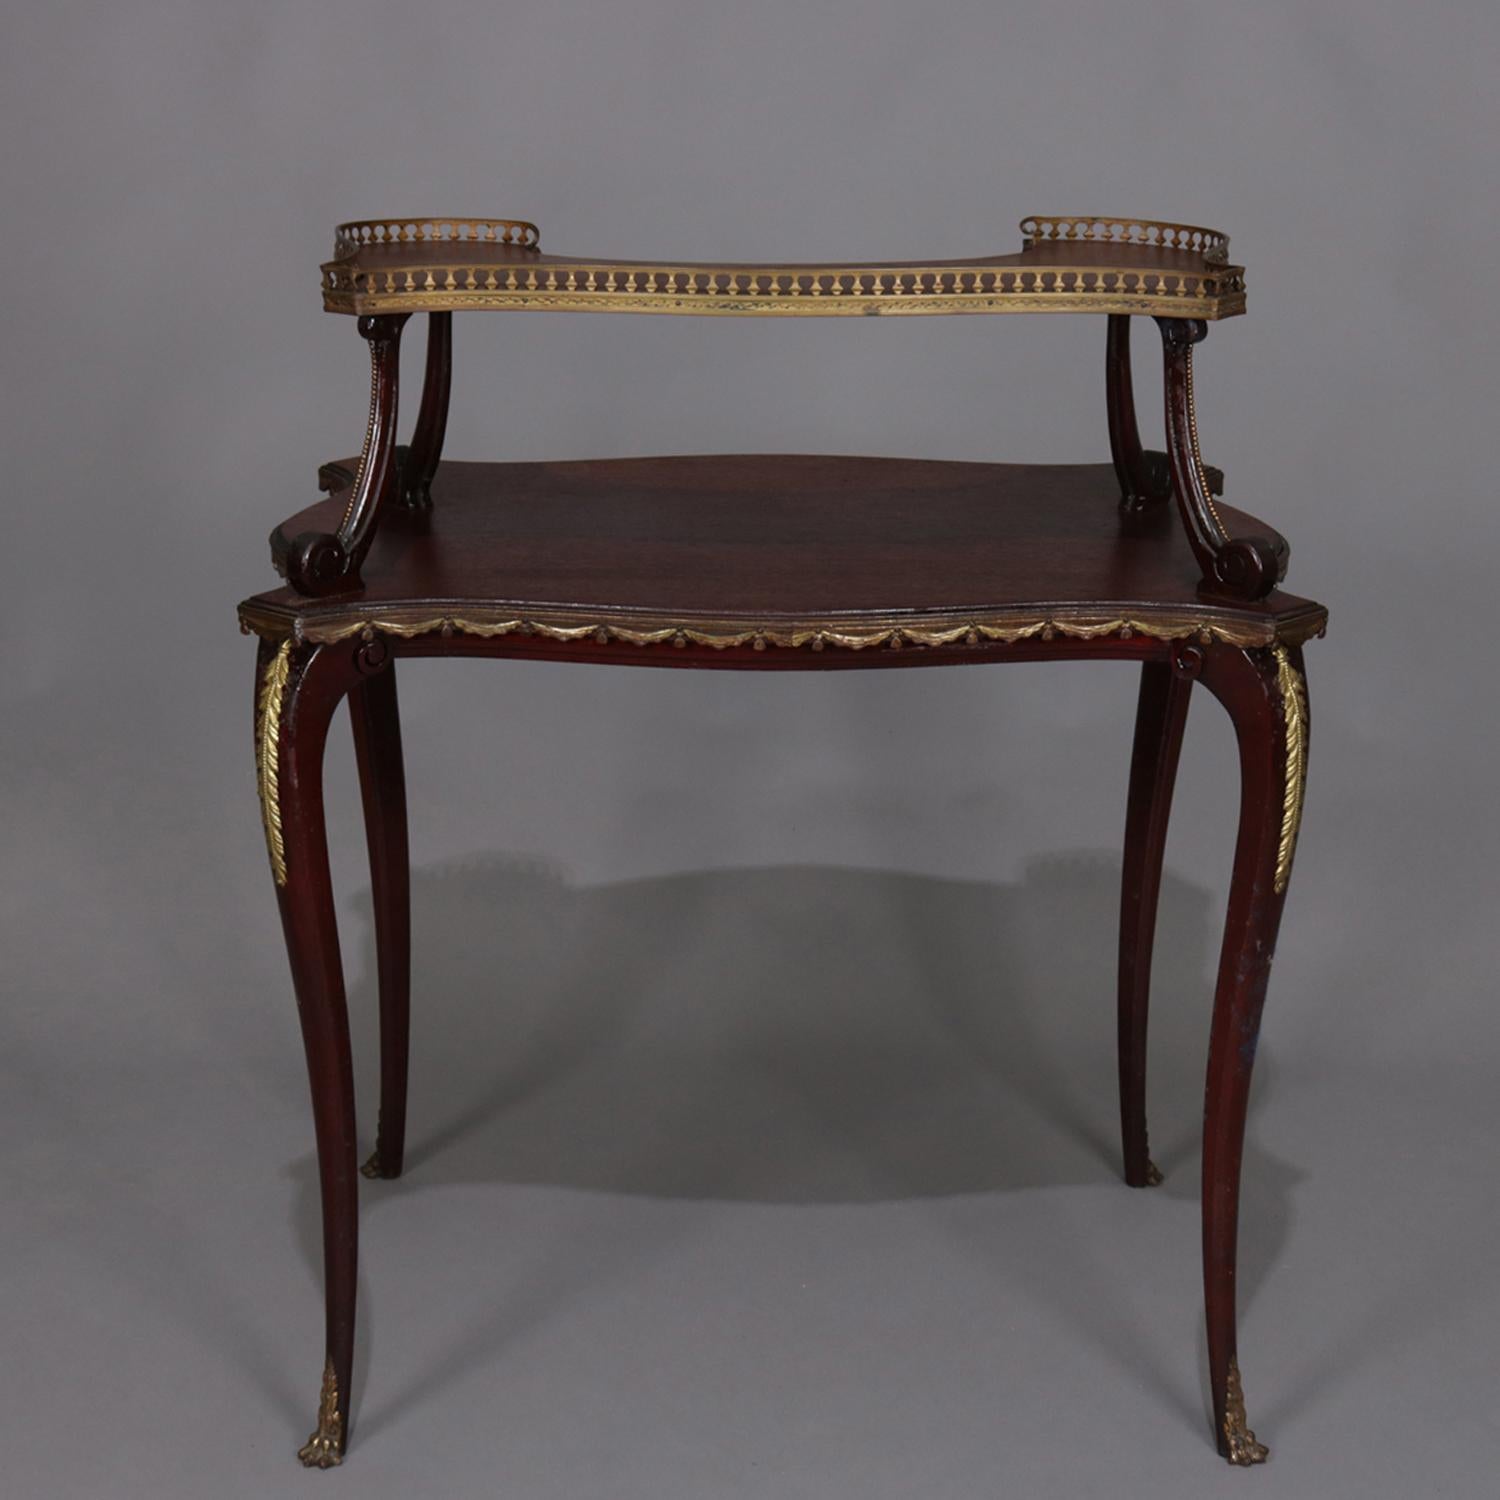 Bronze Antique French Louis XVI Mahogany and Ormolu Two-Tiered Stand, 19th Century